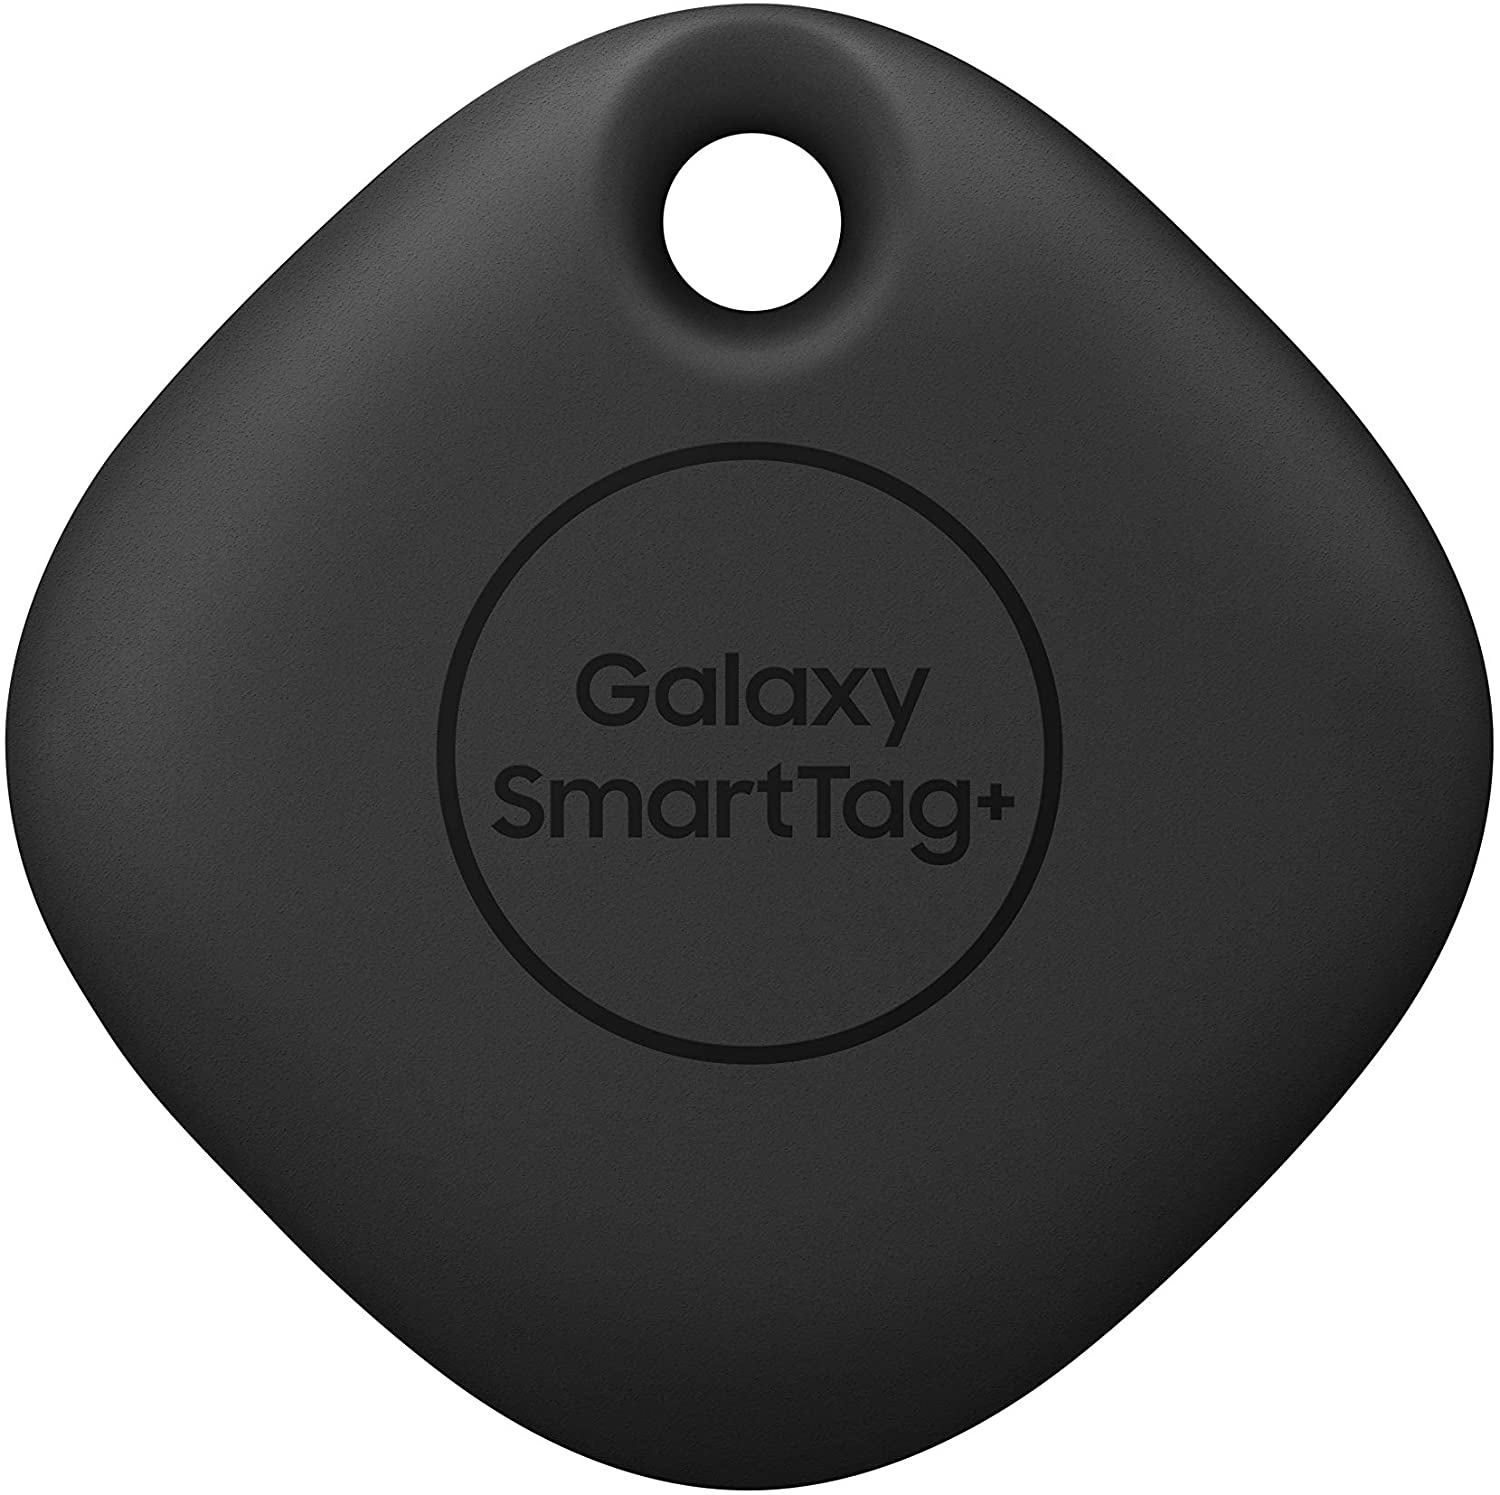 Samsung's $30 Galaxy SmartTag 2 arrives on October 11 with an all-new design